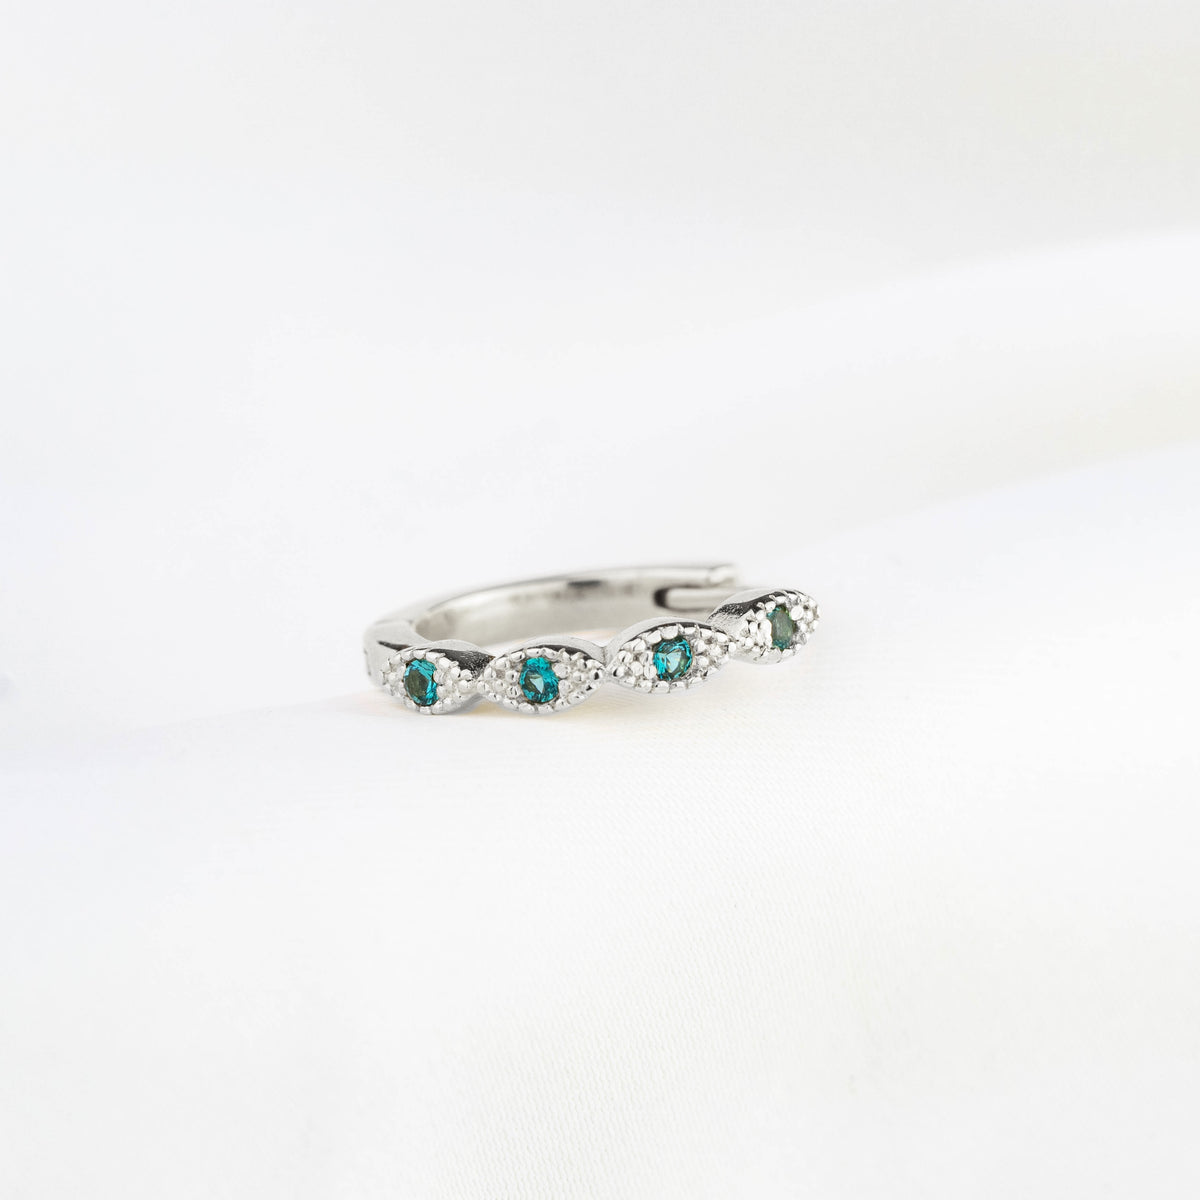 Silver Turquoise Blue Delicate Cubic Hoop